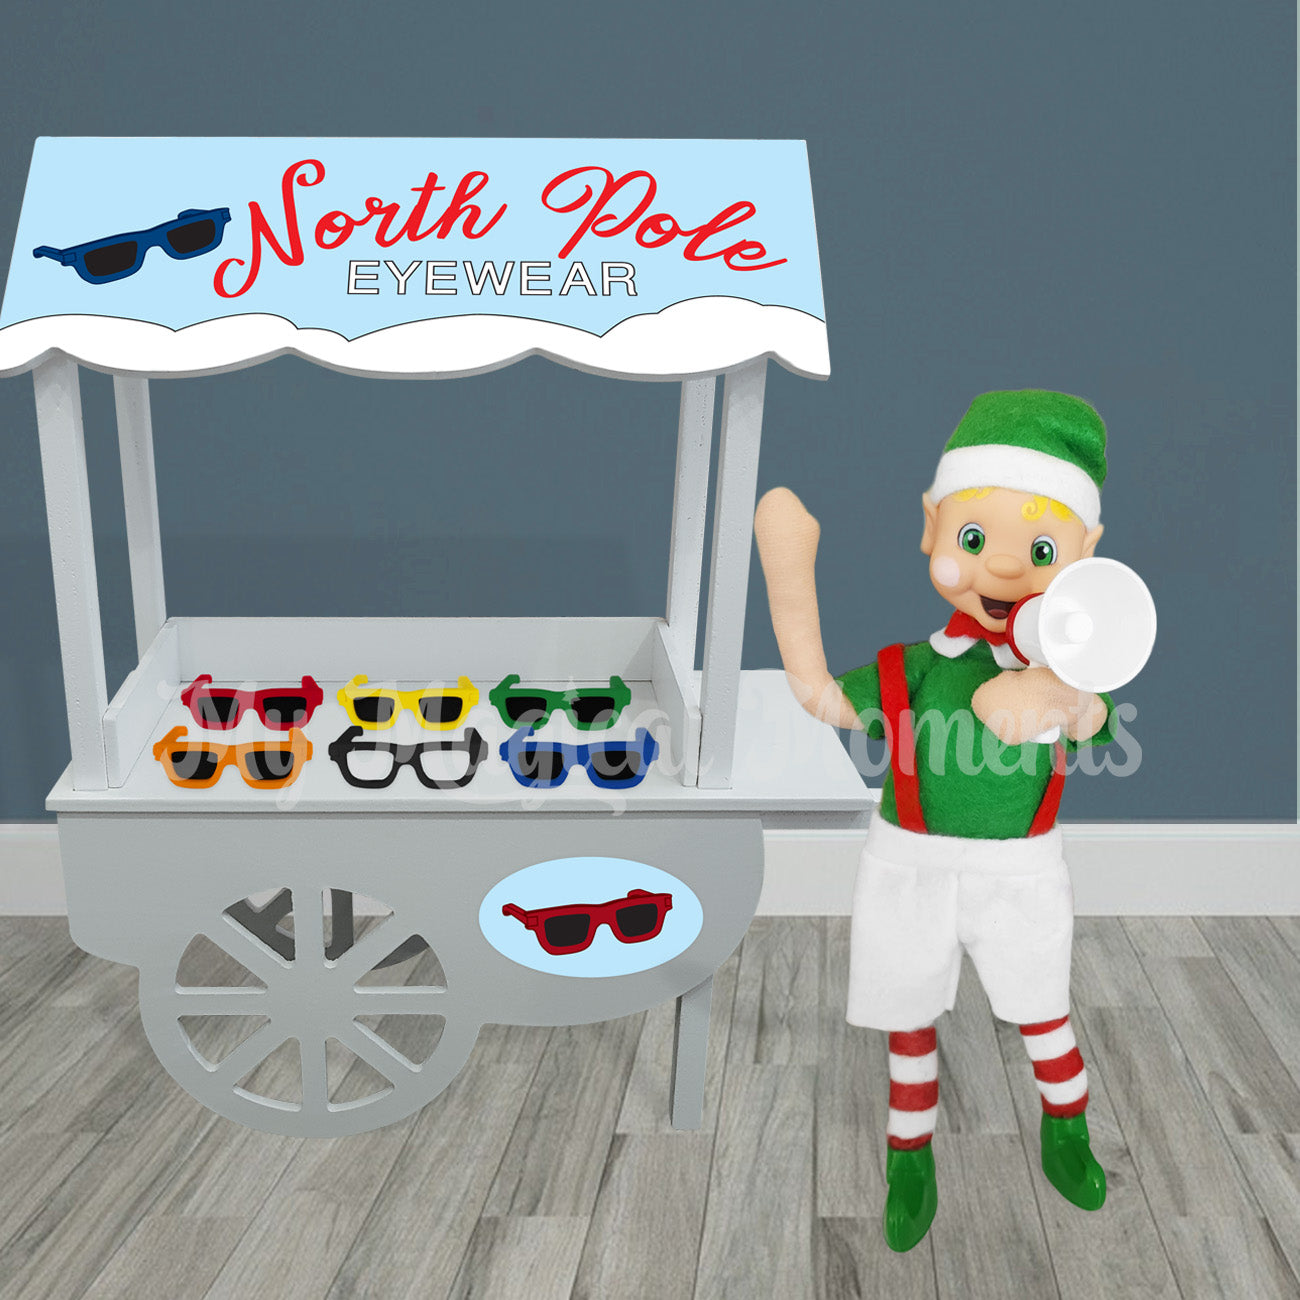 Elf with a megaphone selling reading glasses and sunglasses